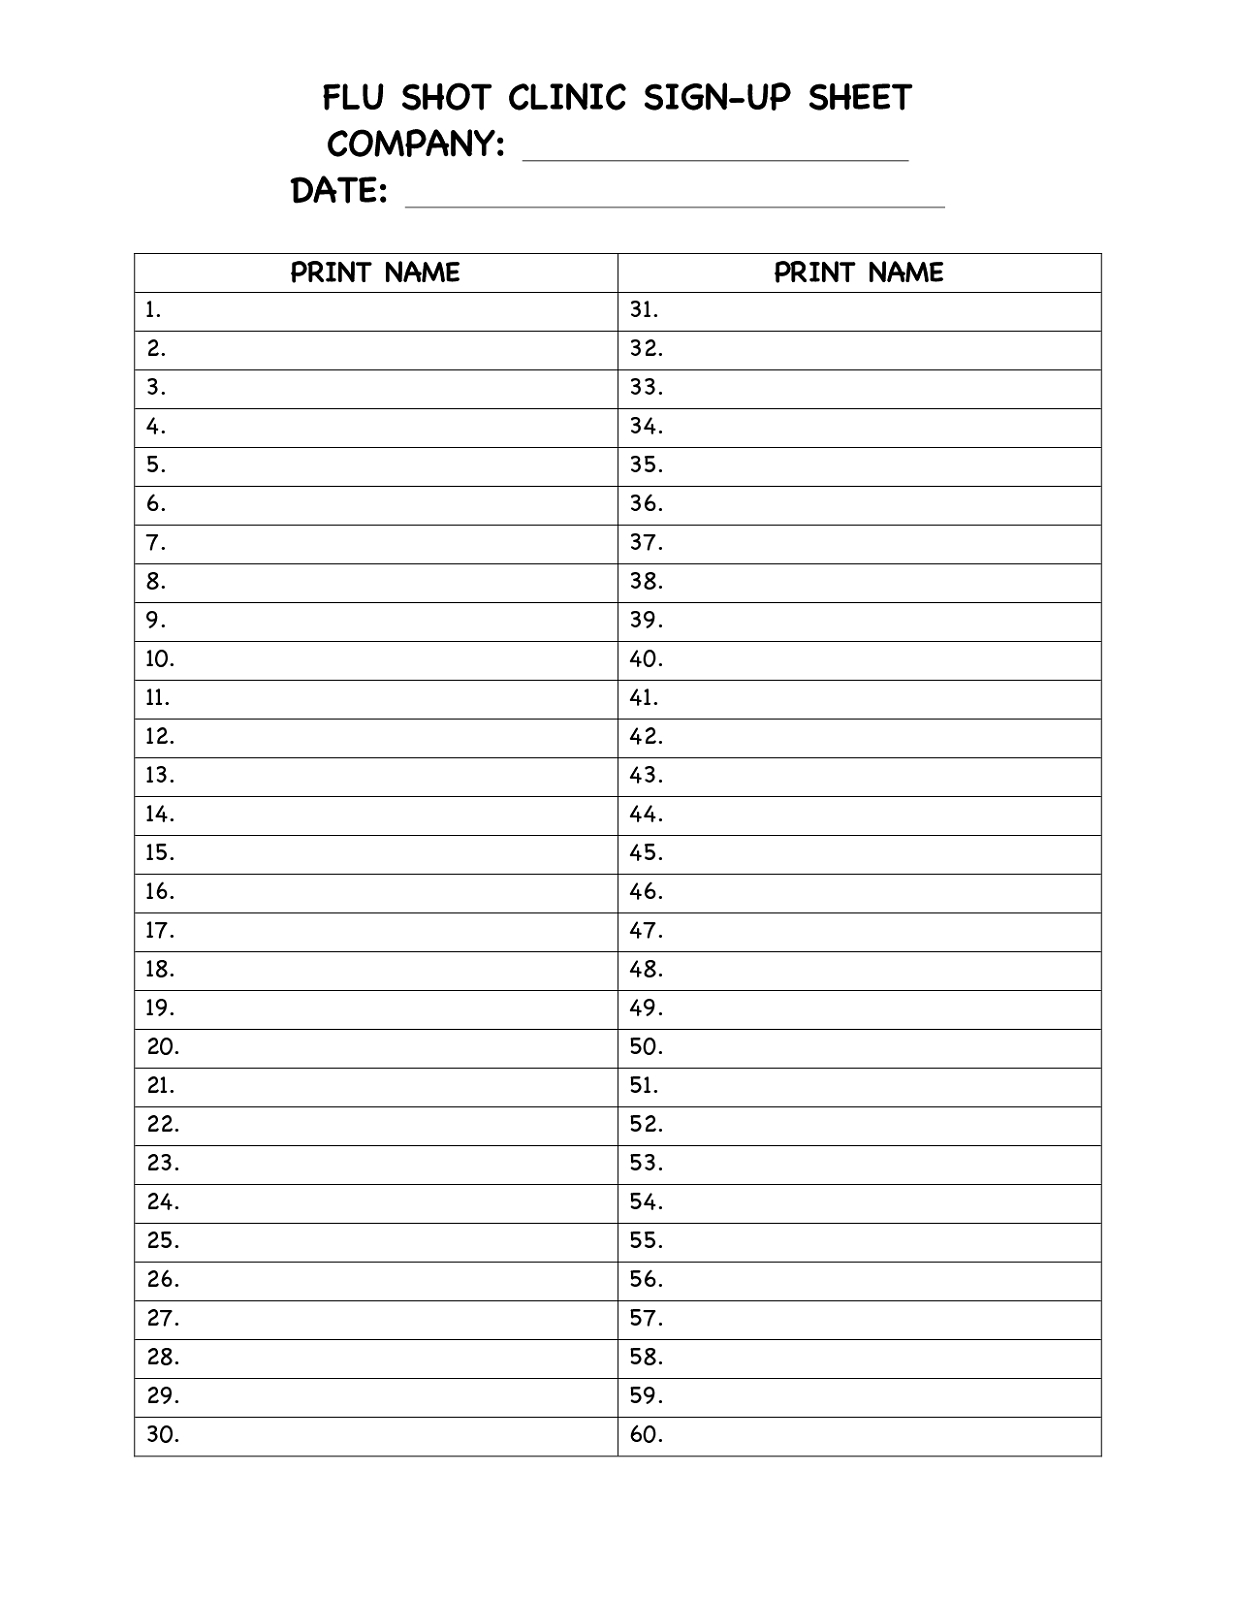 Potluck Sign Up Sheet Word For Events | Loving Printable With Regard To Free Sign Up Sheet Template Word